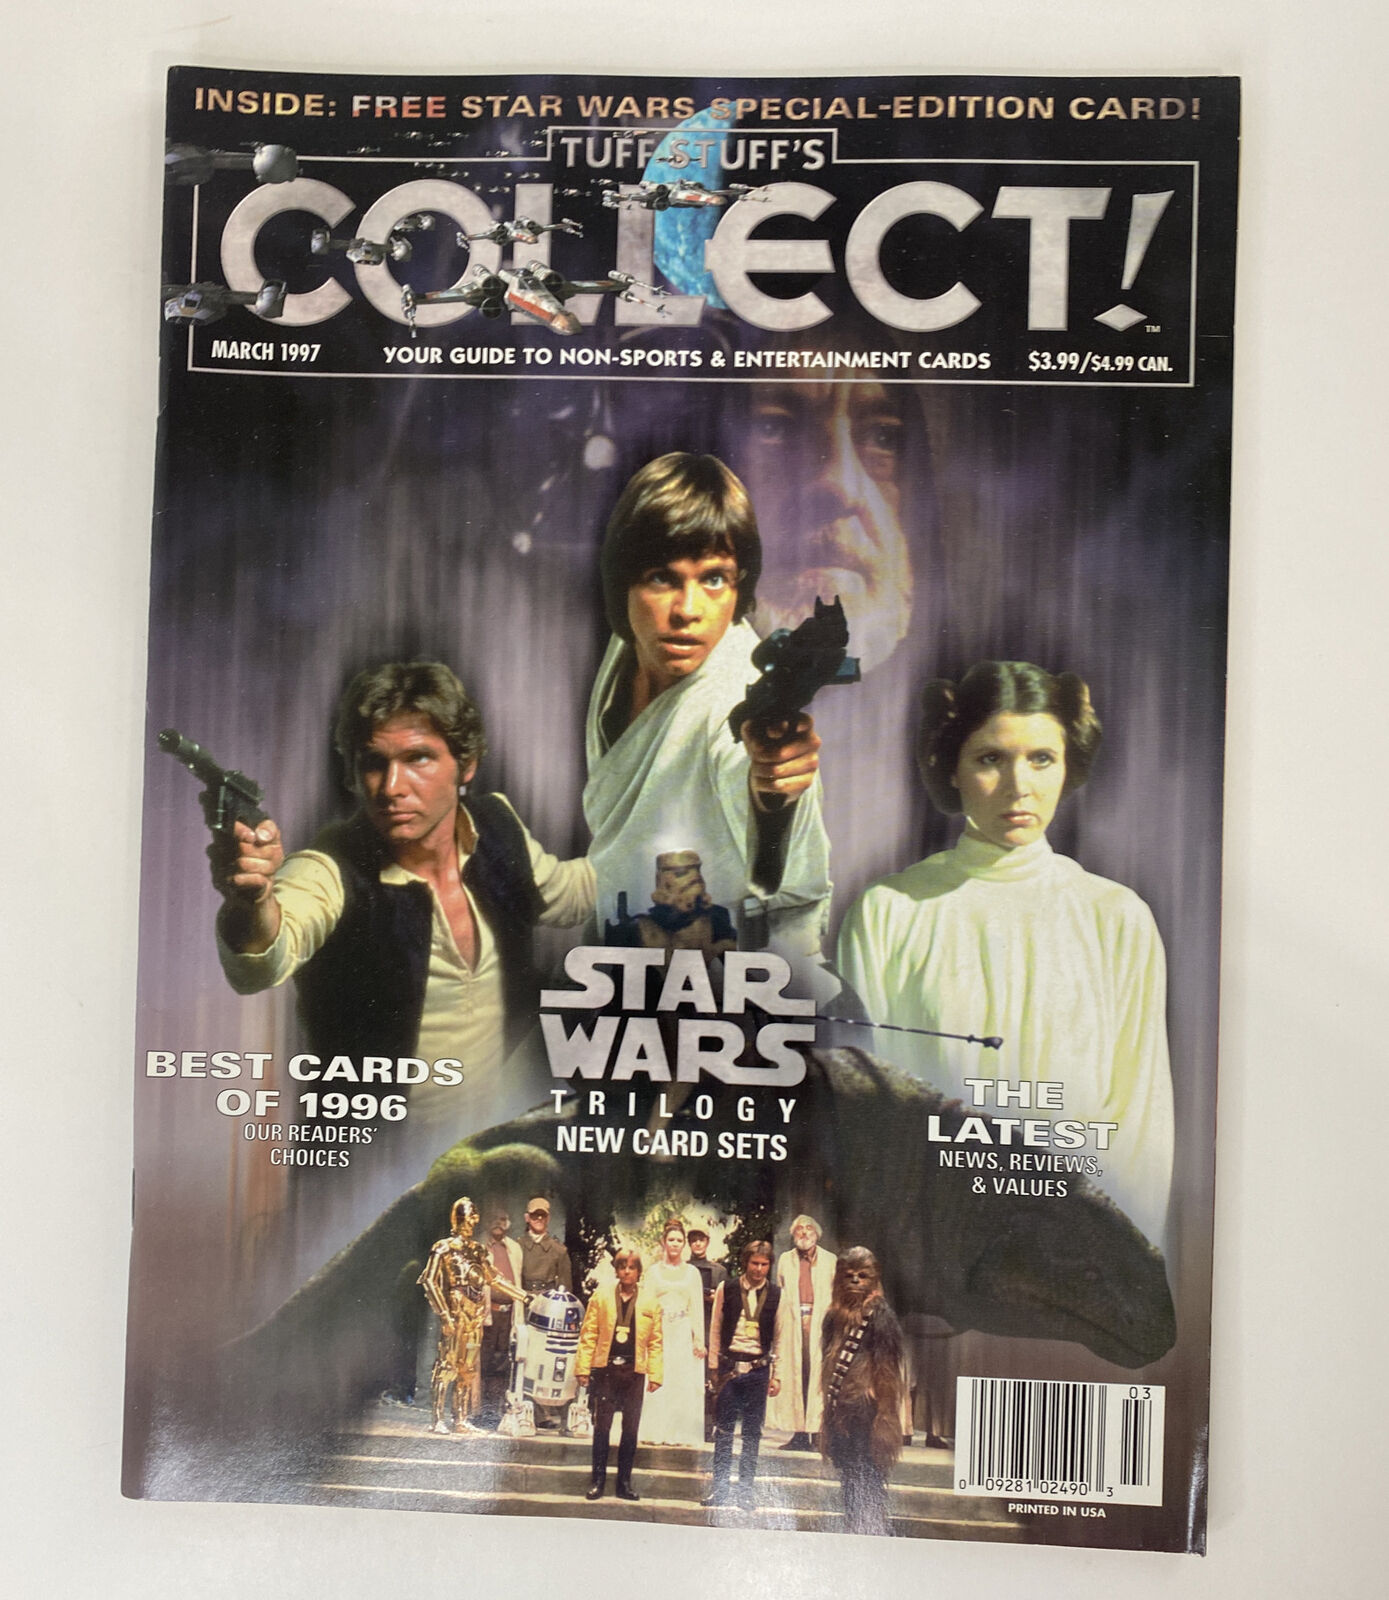 Tuff Stuff's COLLECT Magazine March 1997 Polybag Sealed Star Wars